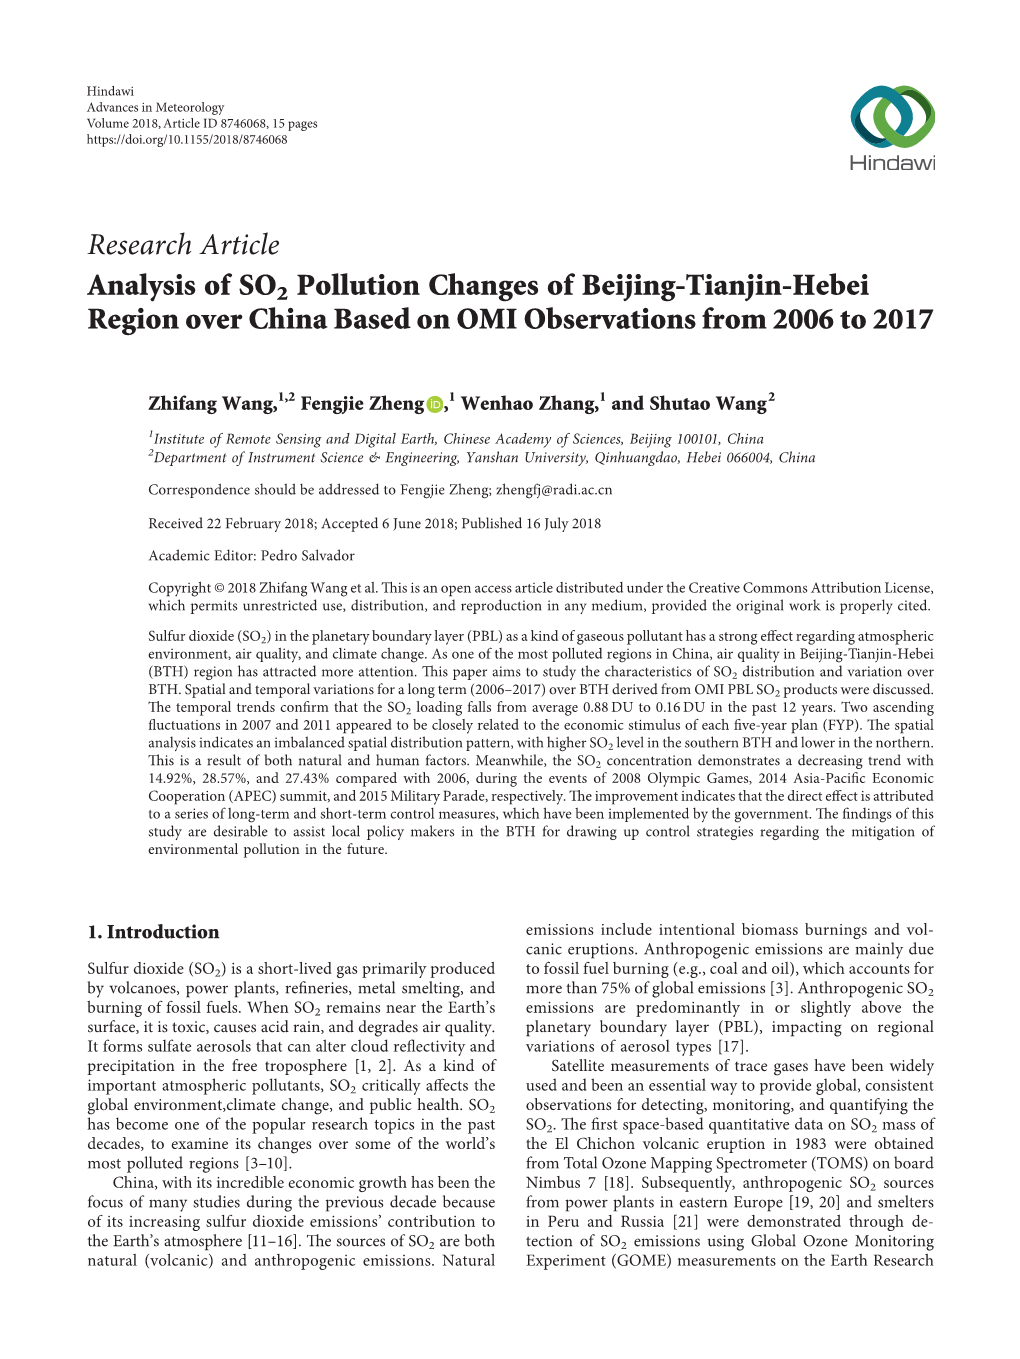 Analysis of SO2 Pollution Changes of Beijing-Tianjin-Hebei Region Over China Based on OMI Observations from 2006 to 2017